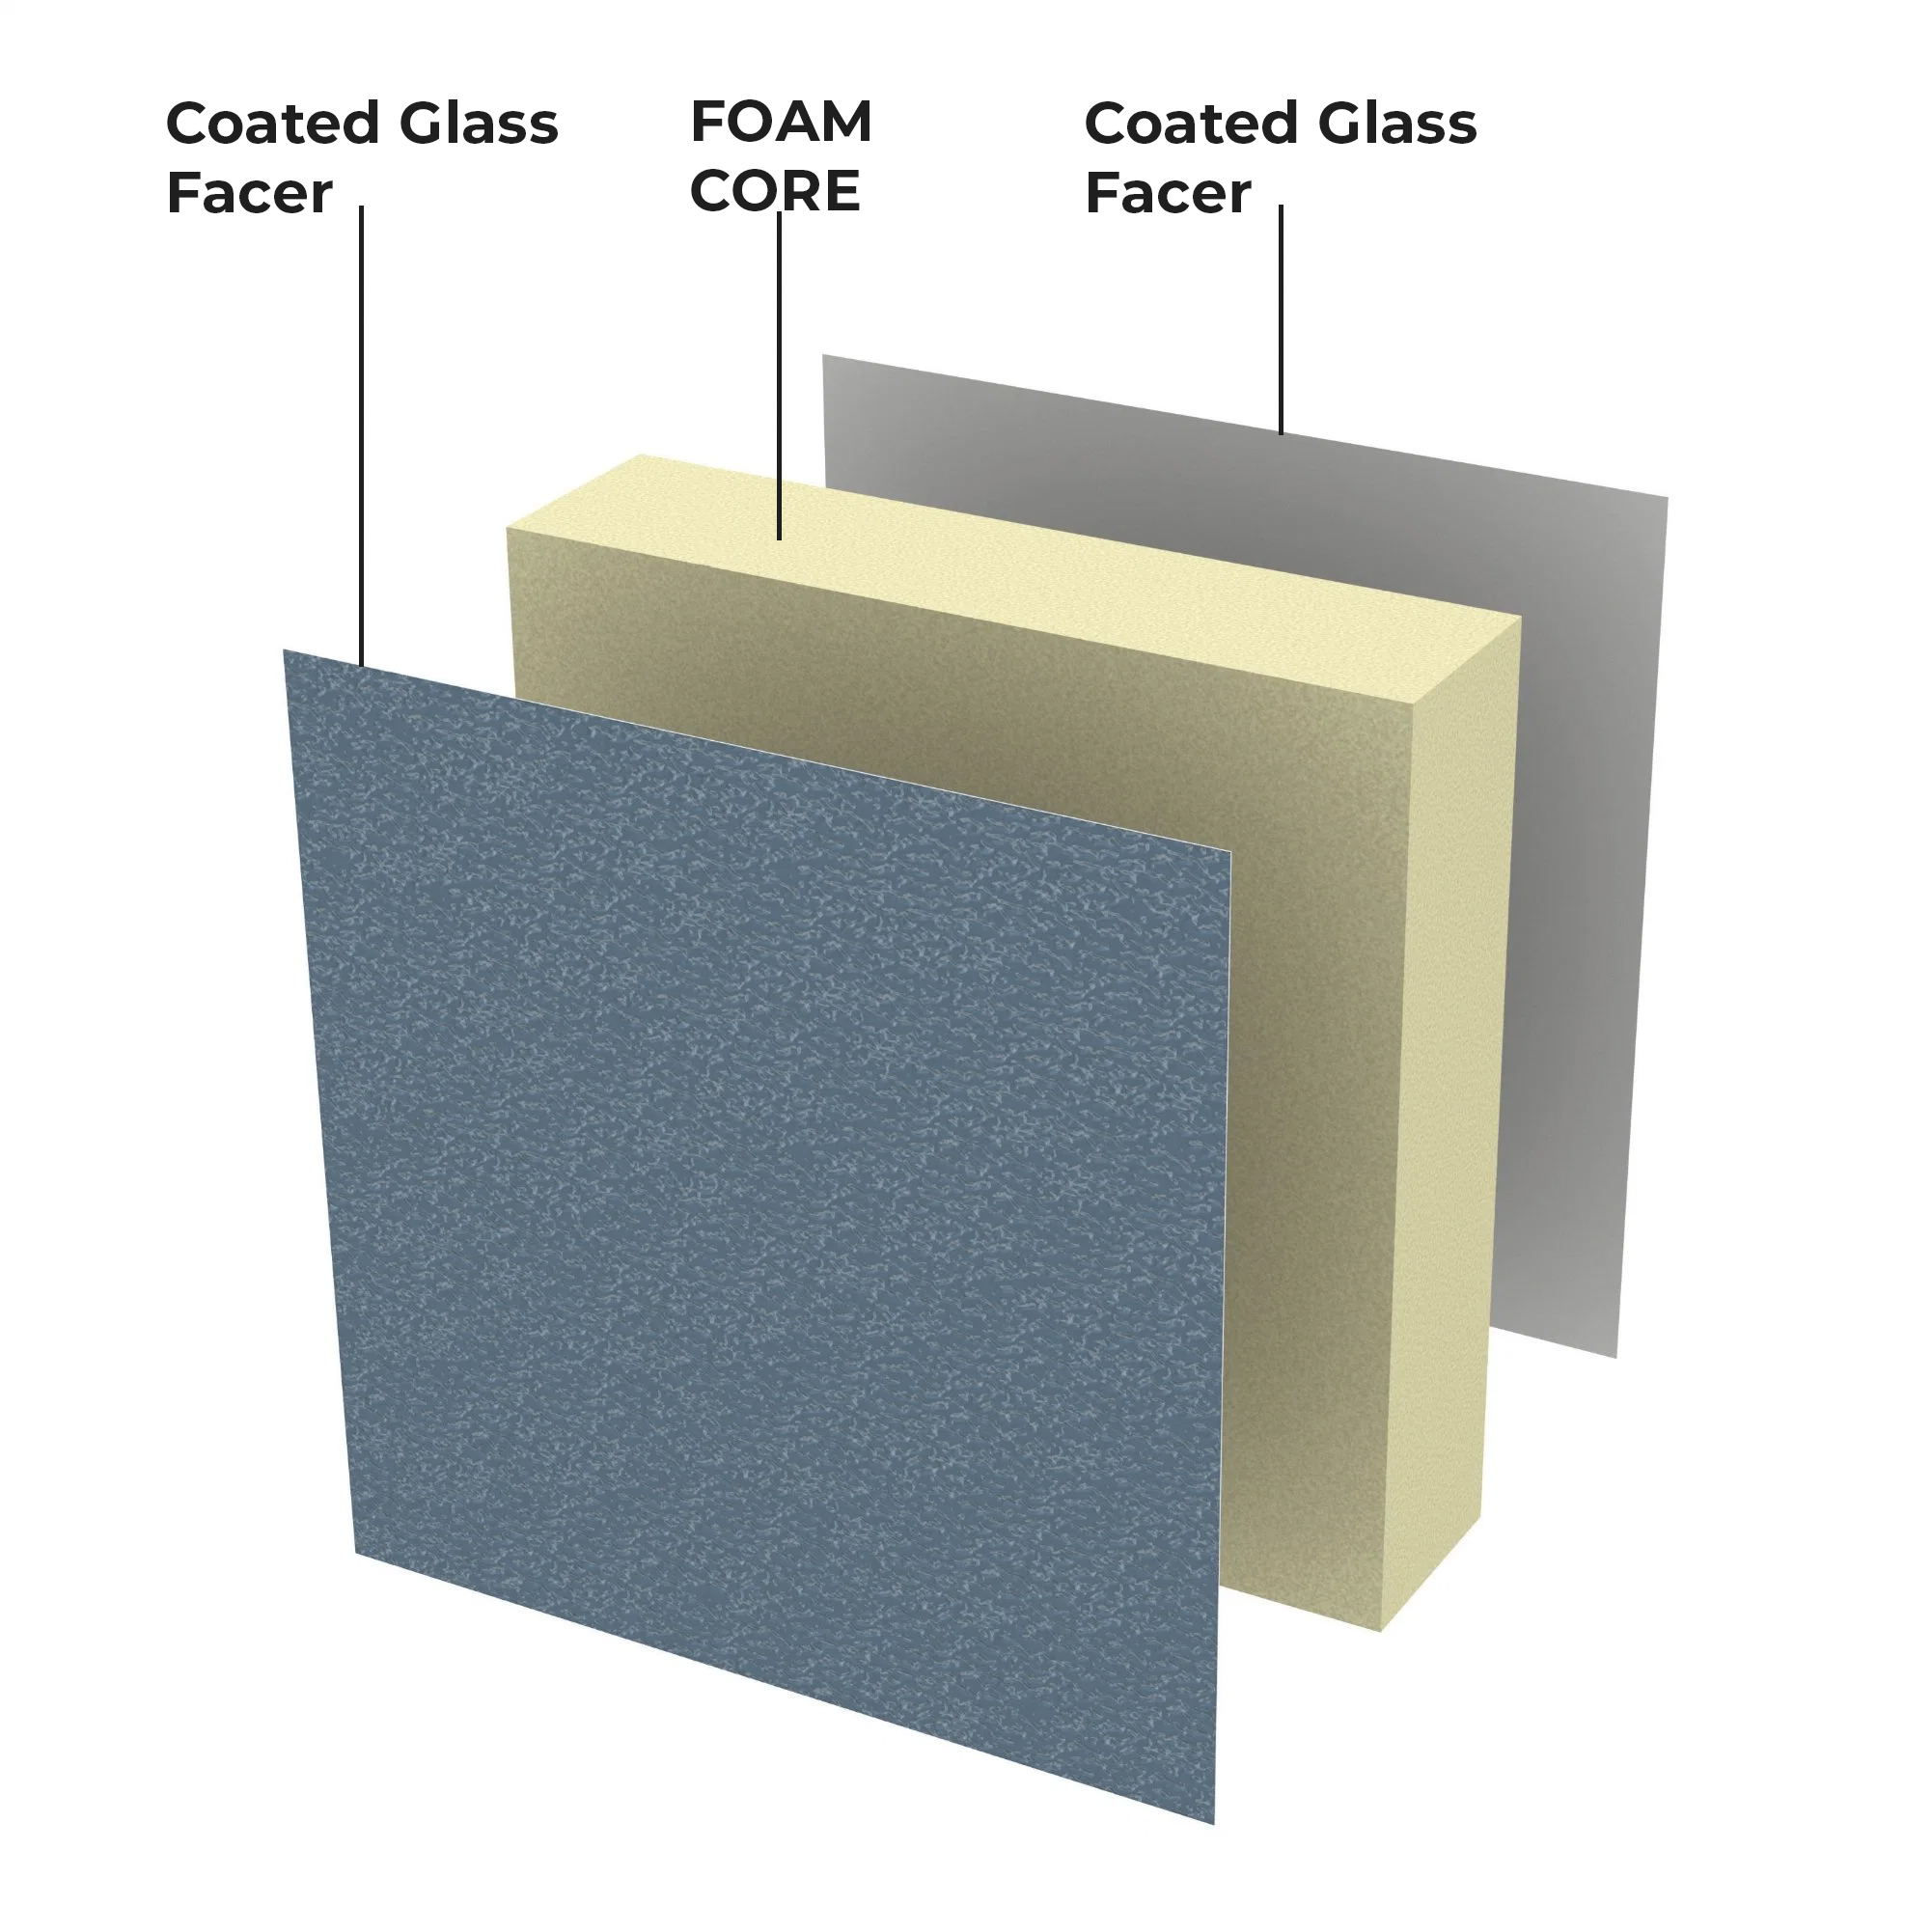 Excellent Flame Retardant PIR Foam Coated Glass Facer for Exterior Wall Insulation